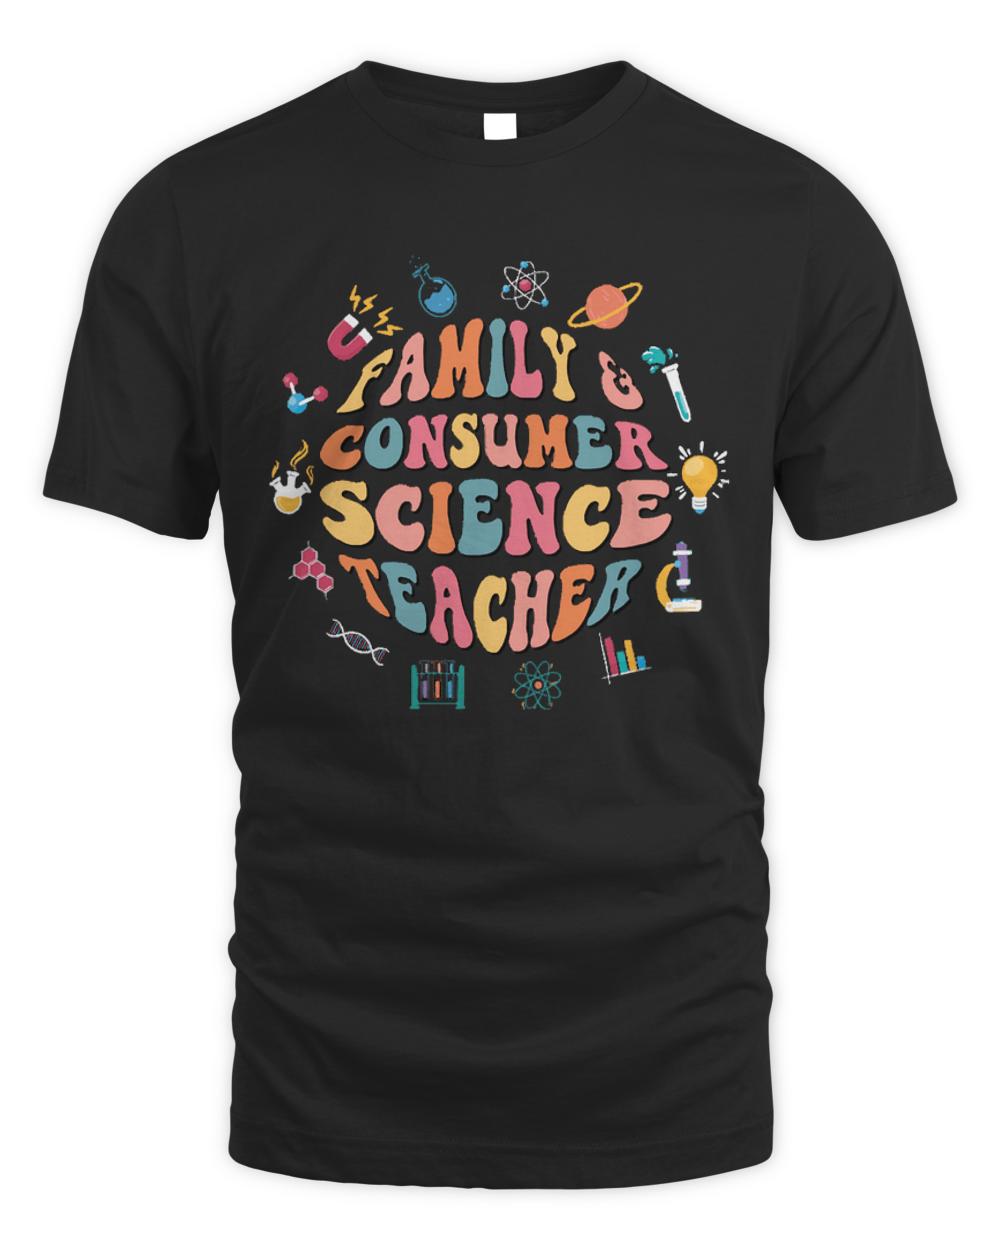 Science Teacher Gift T- Shirt Family and Consumer Science Vintage Vibes back to school Retro Groovy T- Shirt